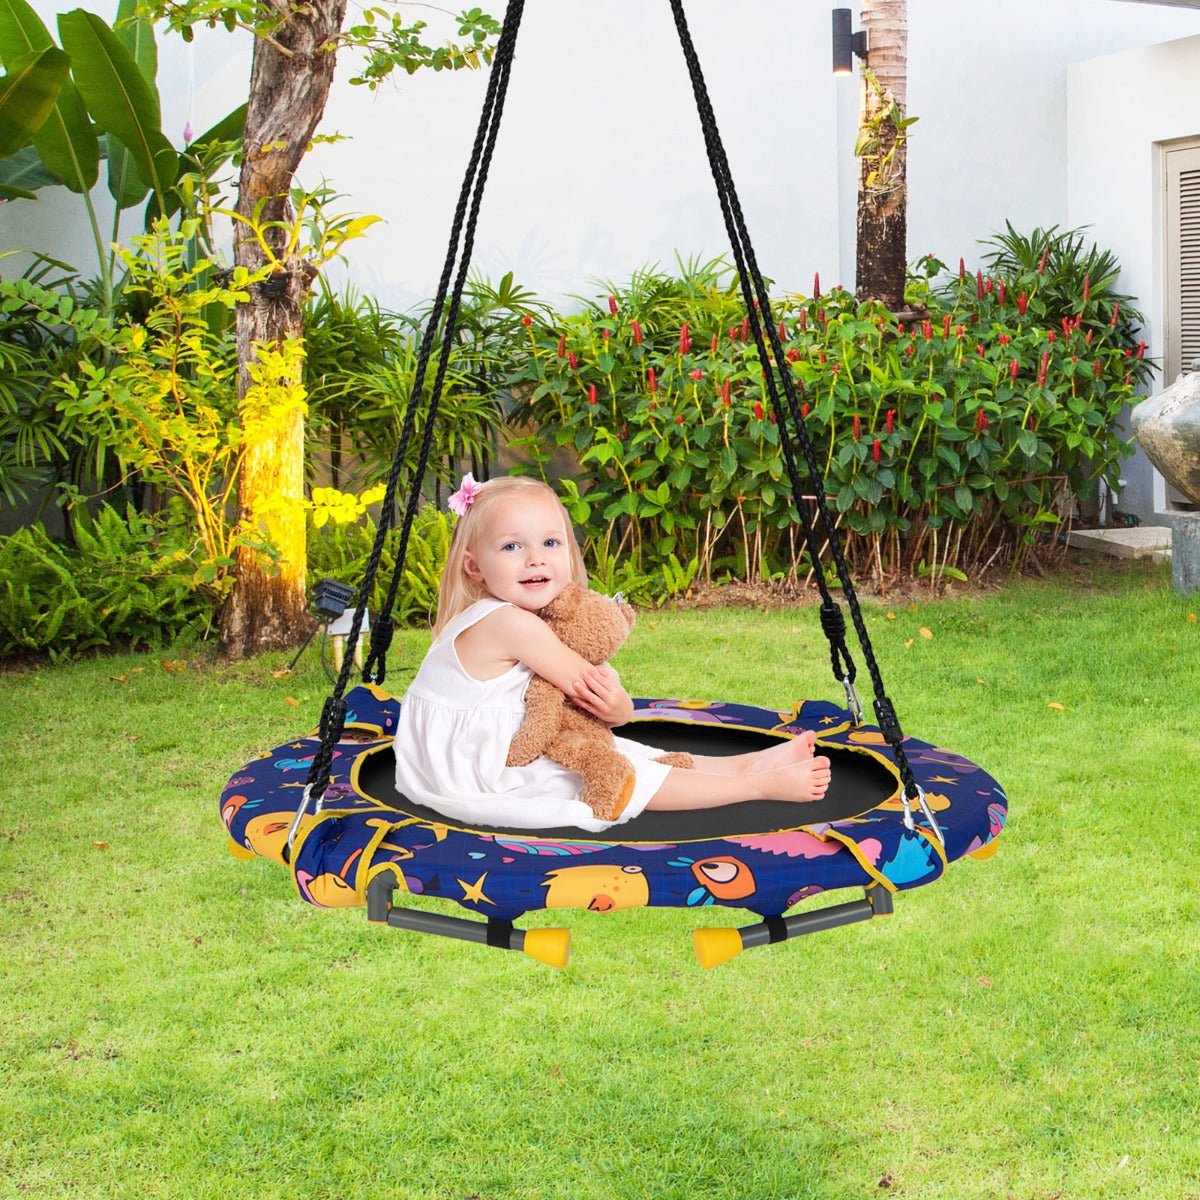 Playful Combo: Convertible Swing and Trampoline Set with Upholstered Handrail for Kids